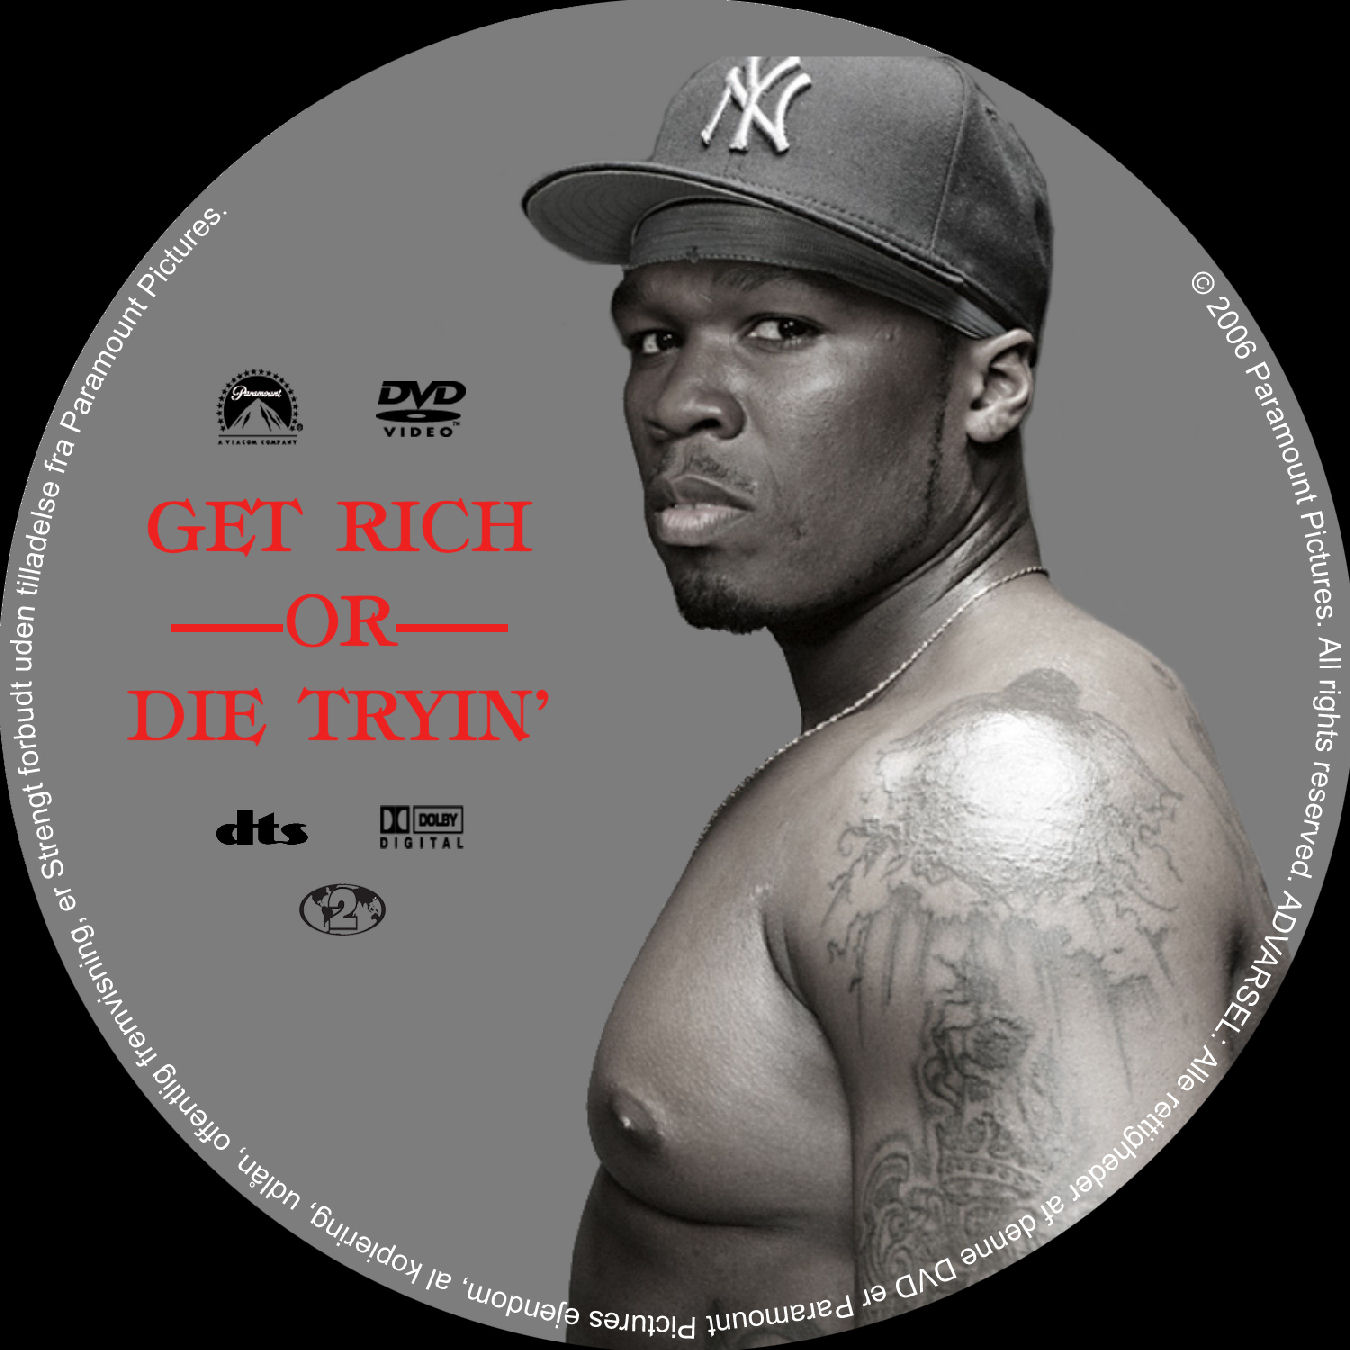 wikipedia 50 cent get rich die try in torrent